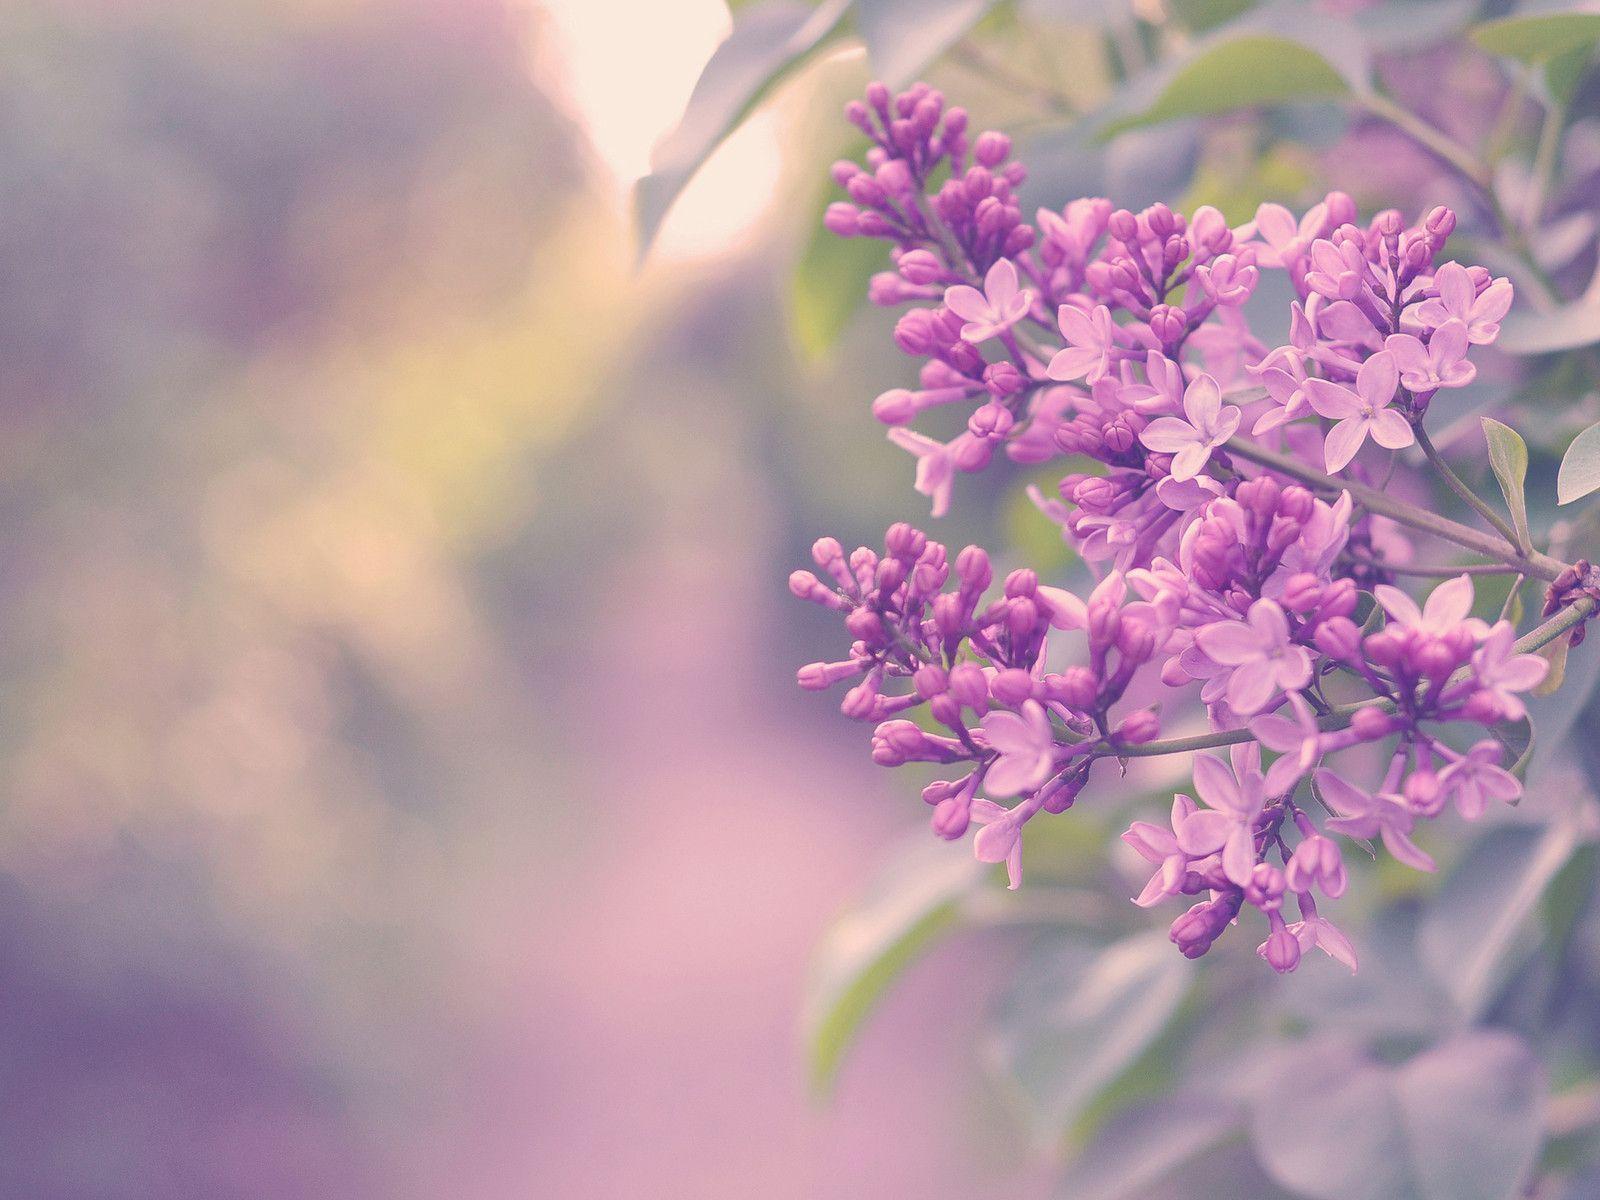 HD wallpaper purple lilacs selectivefocus photography without lilac  flower  Wallpaper Flare